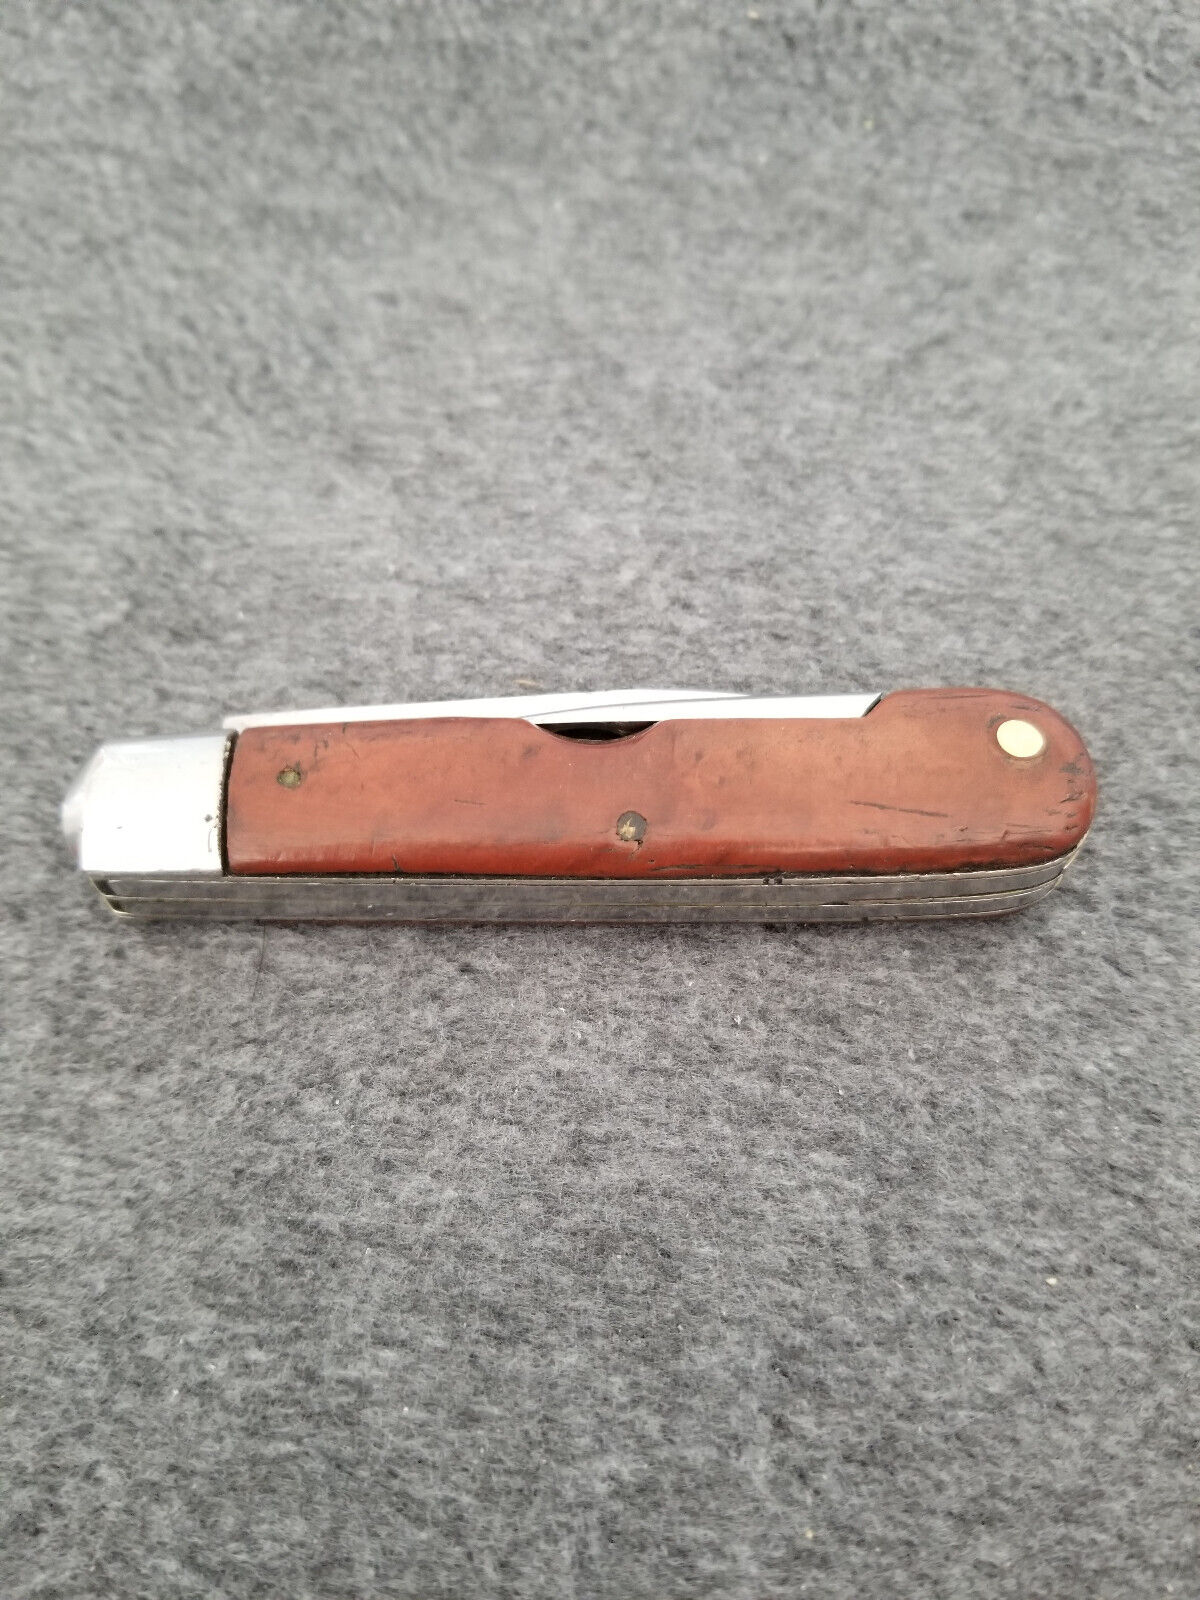 Victorinox Victoria 1908 model from around 1940 in Stainless